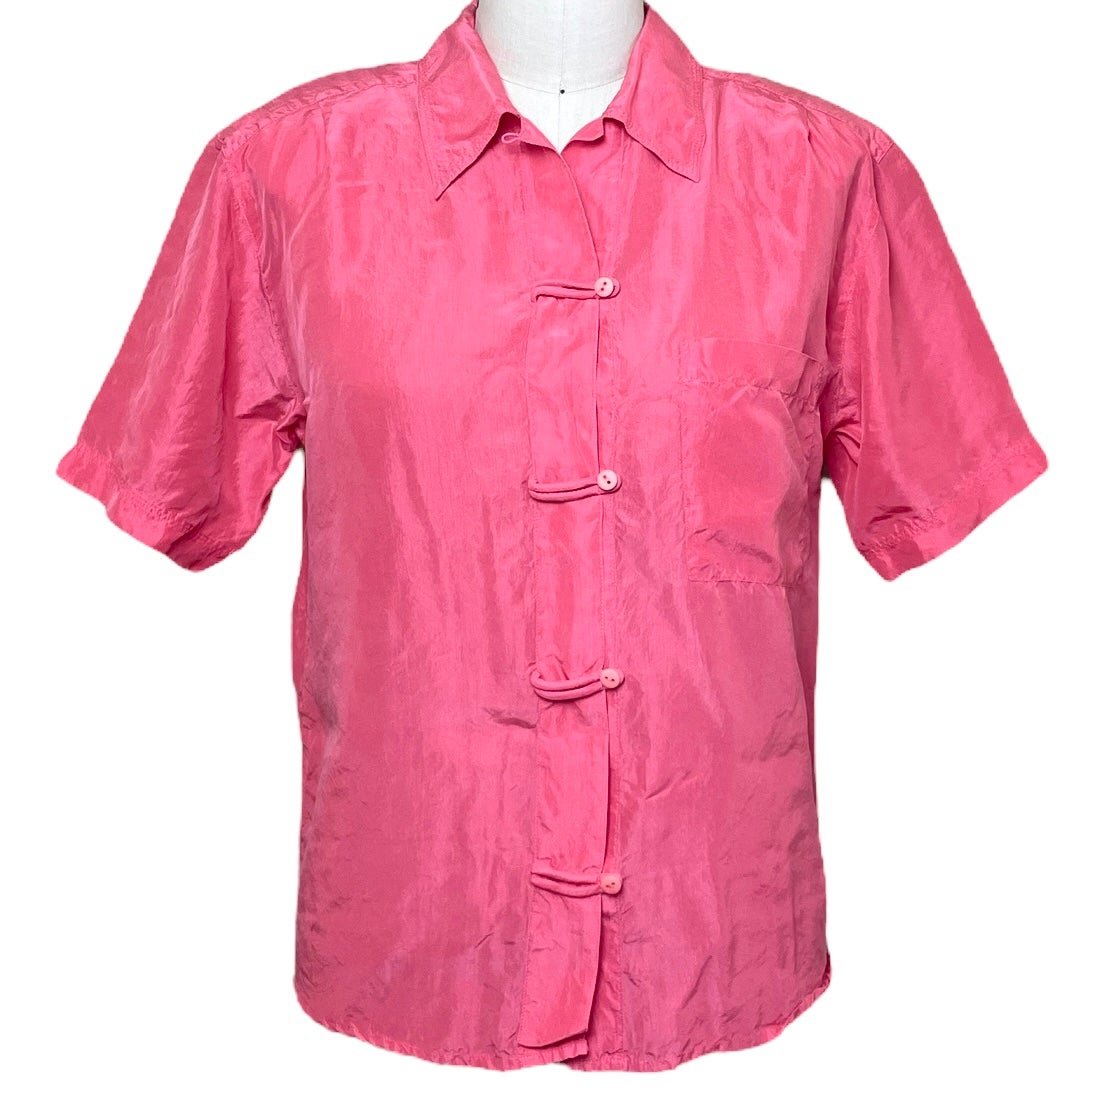 Stylish Vintage 90s The Limited Silk Shirt Blouse Colla